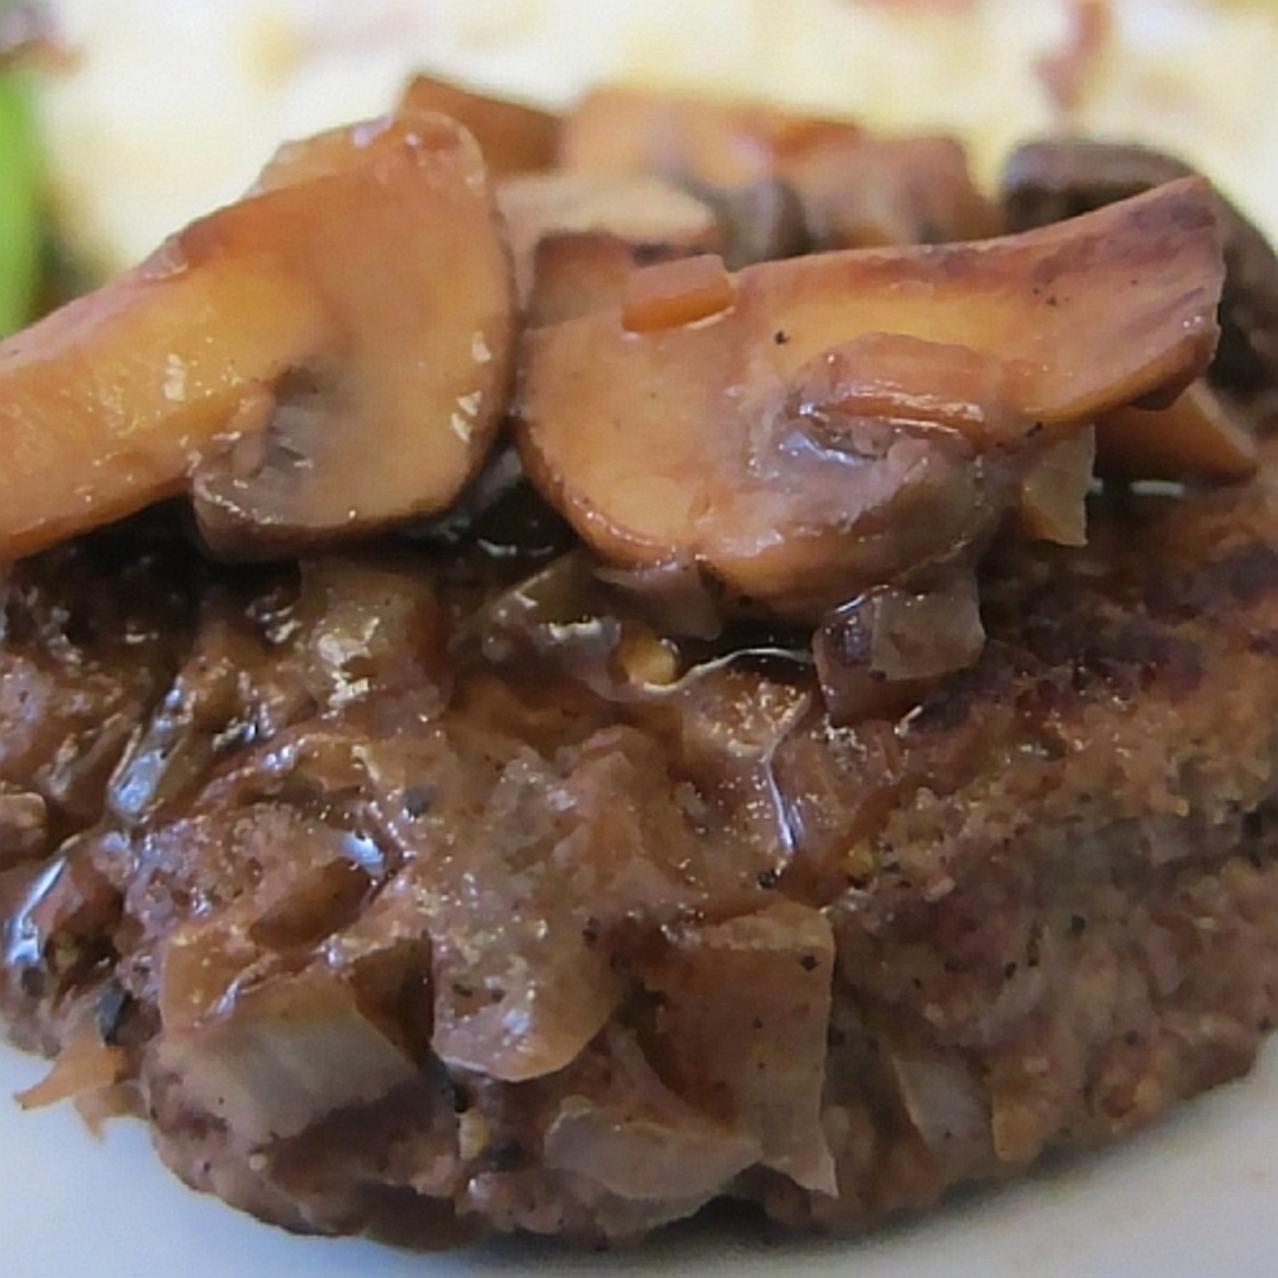  Meat and mushrooms make the perfect pair